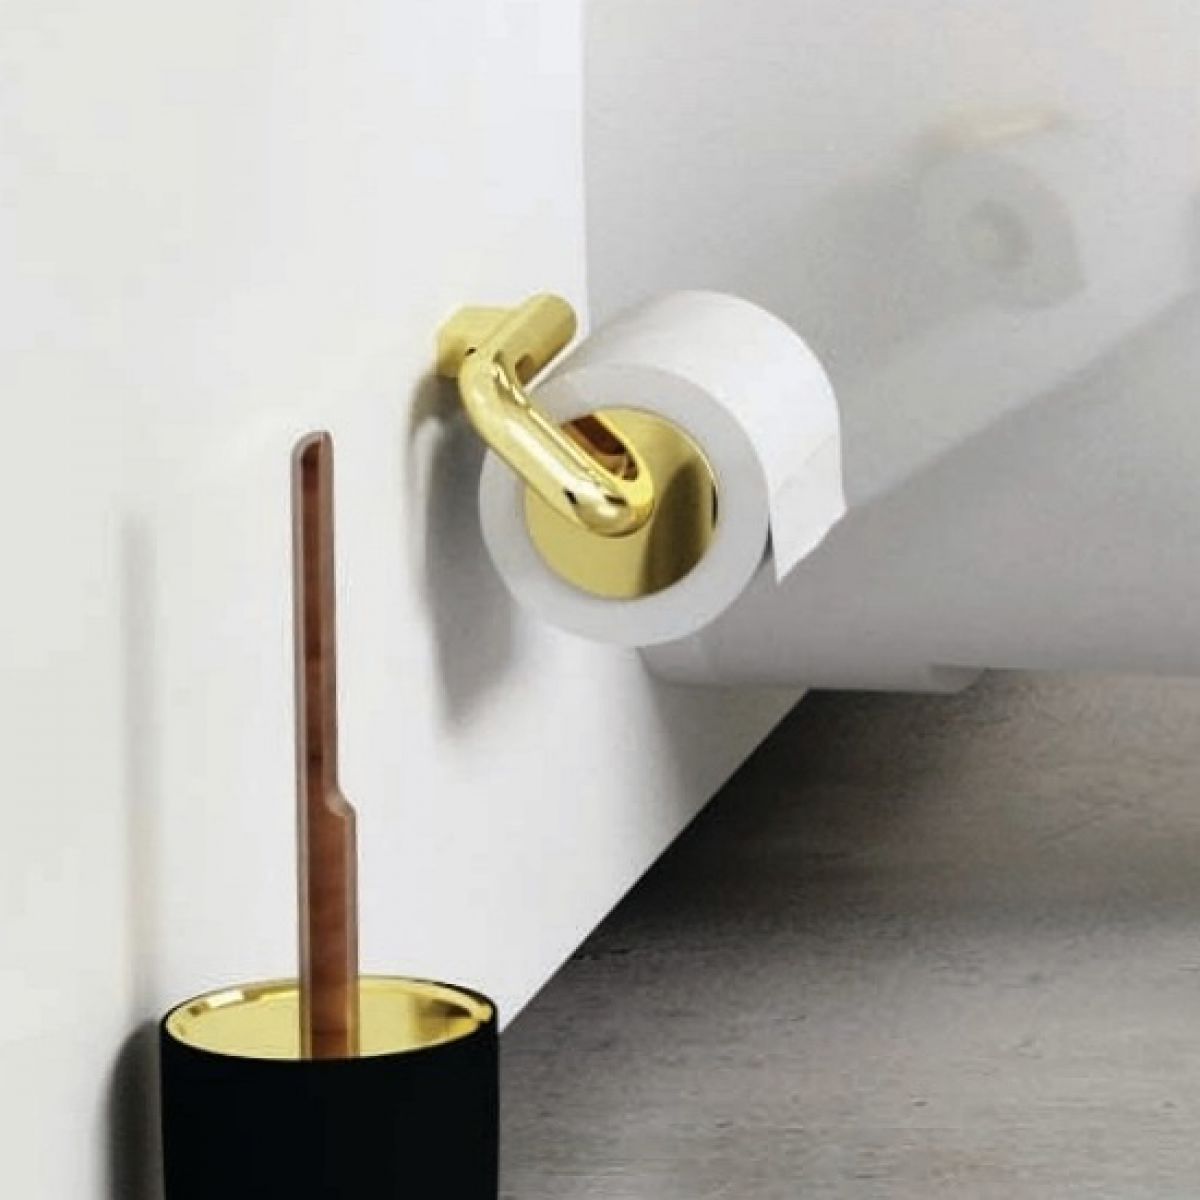 picture of a toilet roll holder